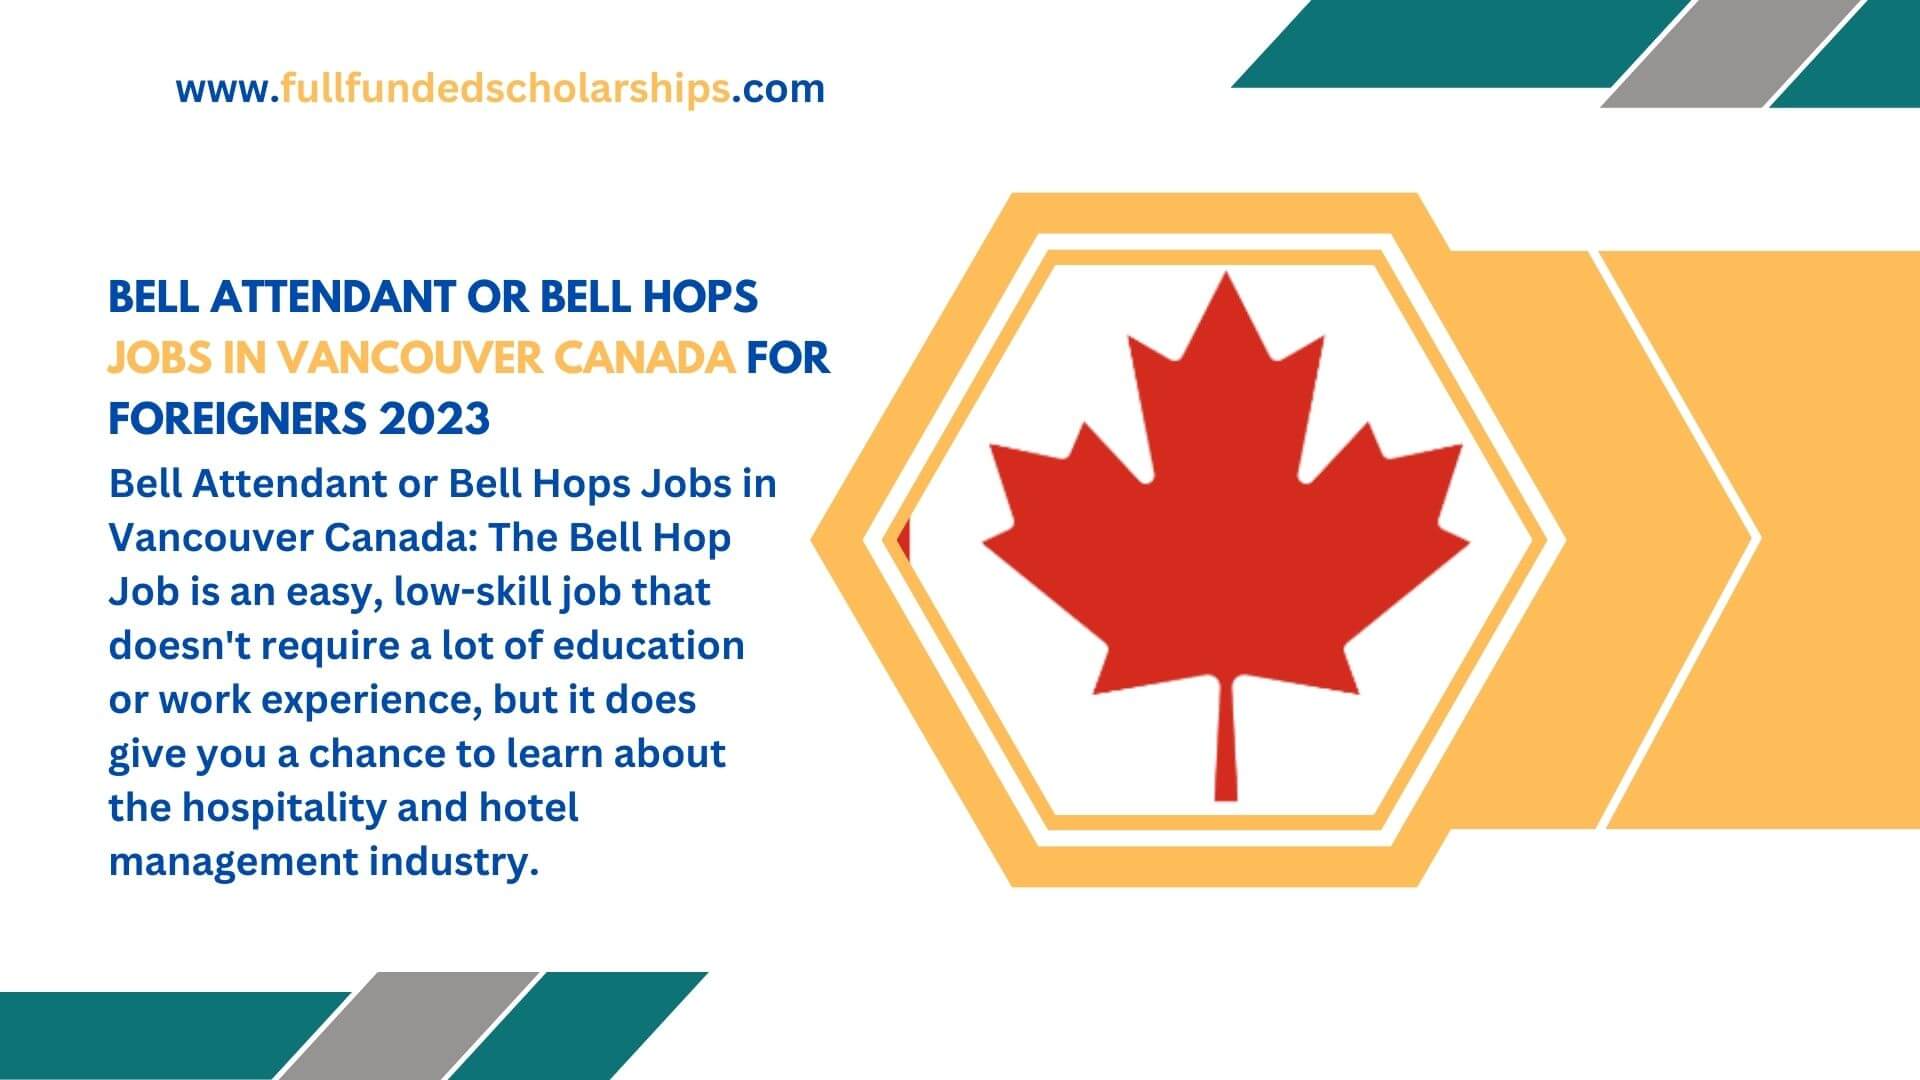 Bell Attendant or Bell Hops Jobs in Vancouver Canada for Foreigners 2023